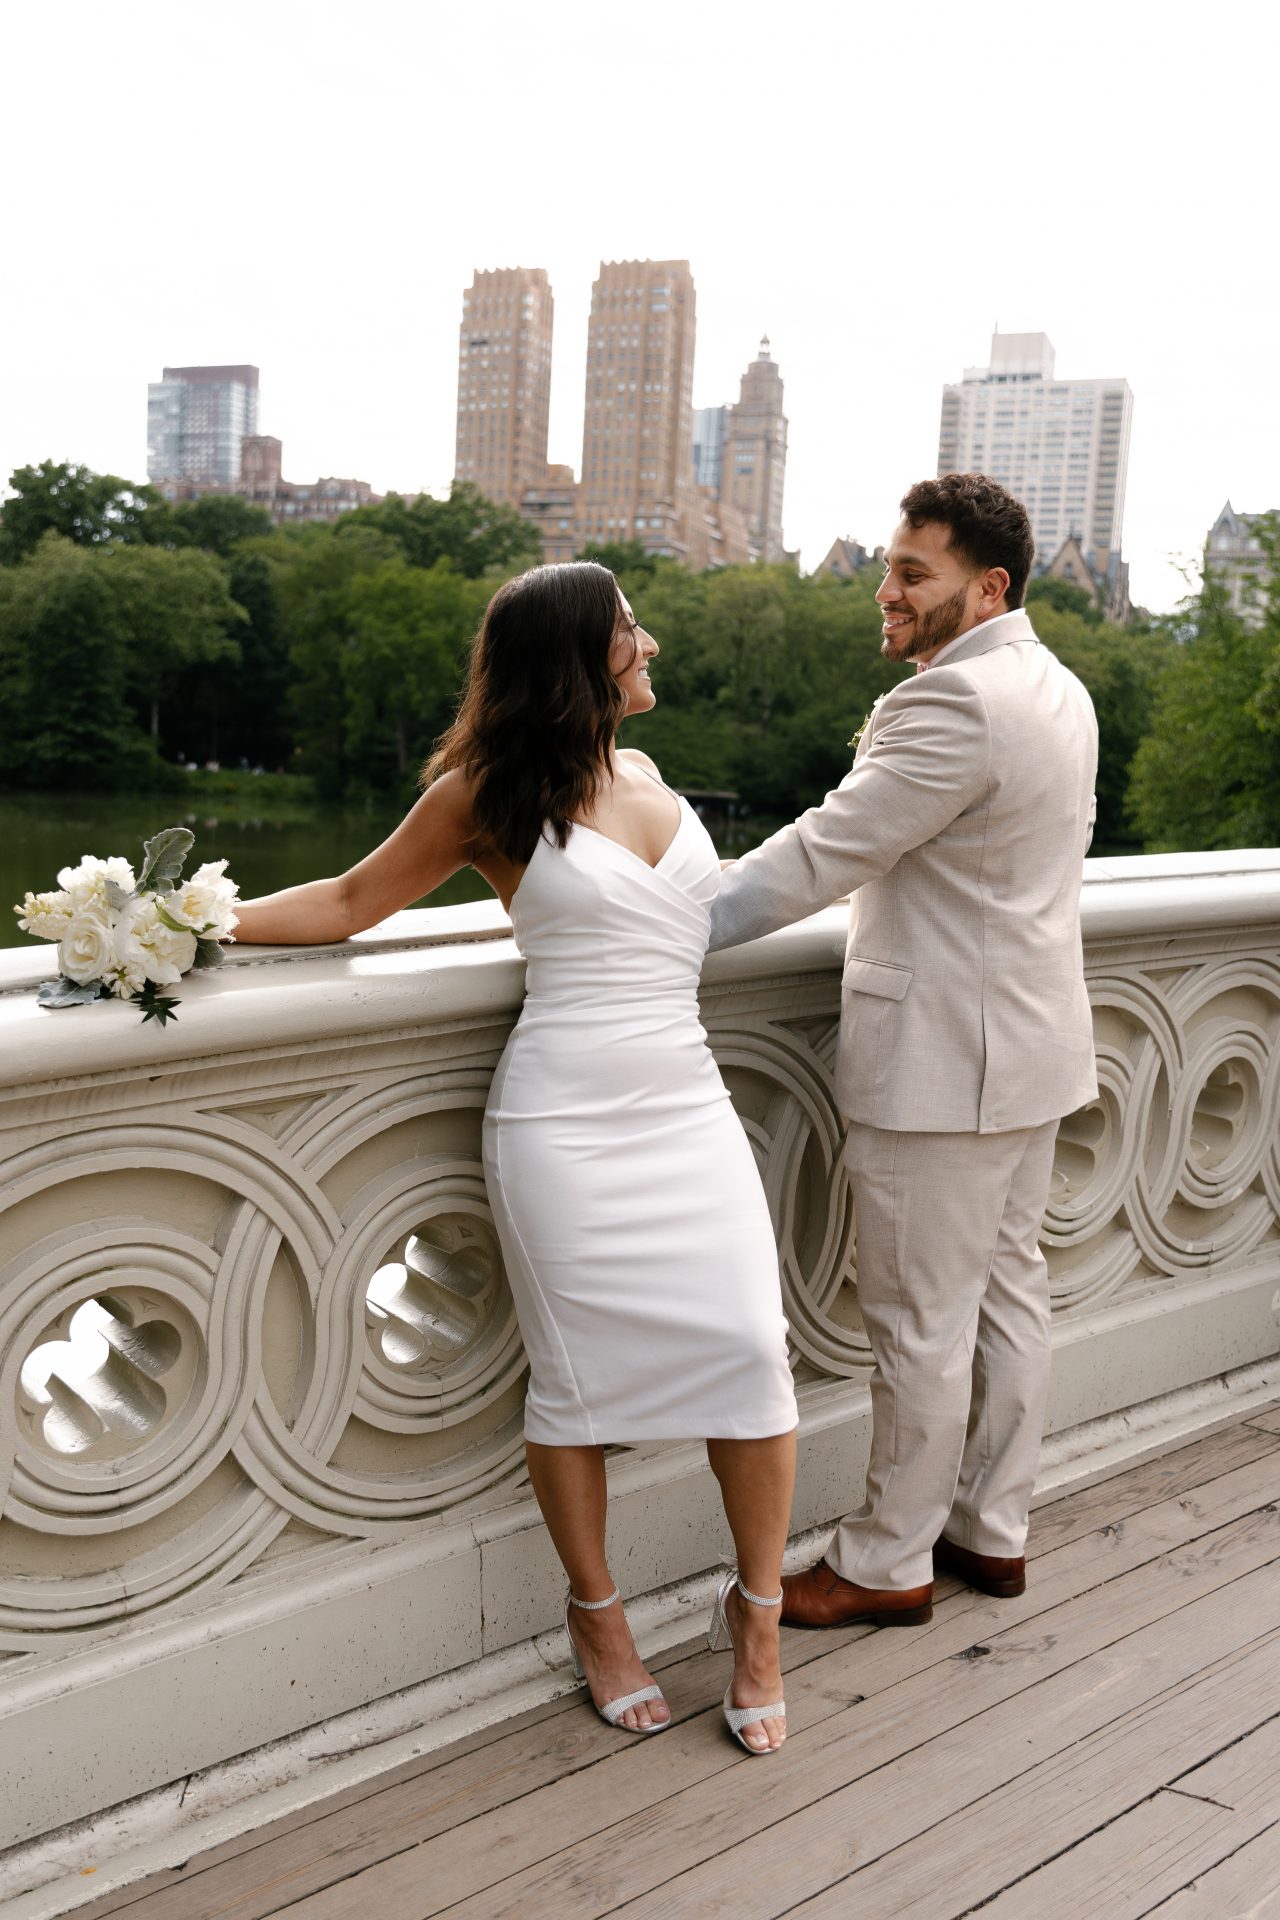 Simple wedding in Central Park NY 13